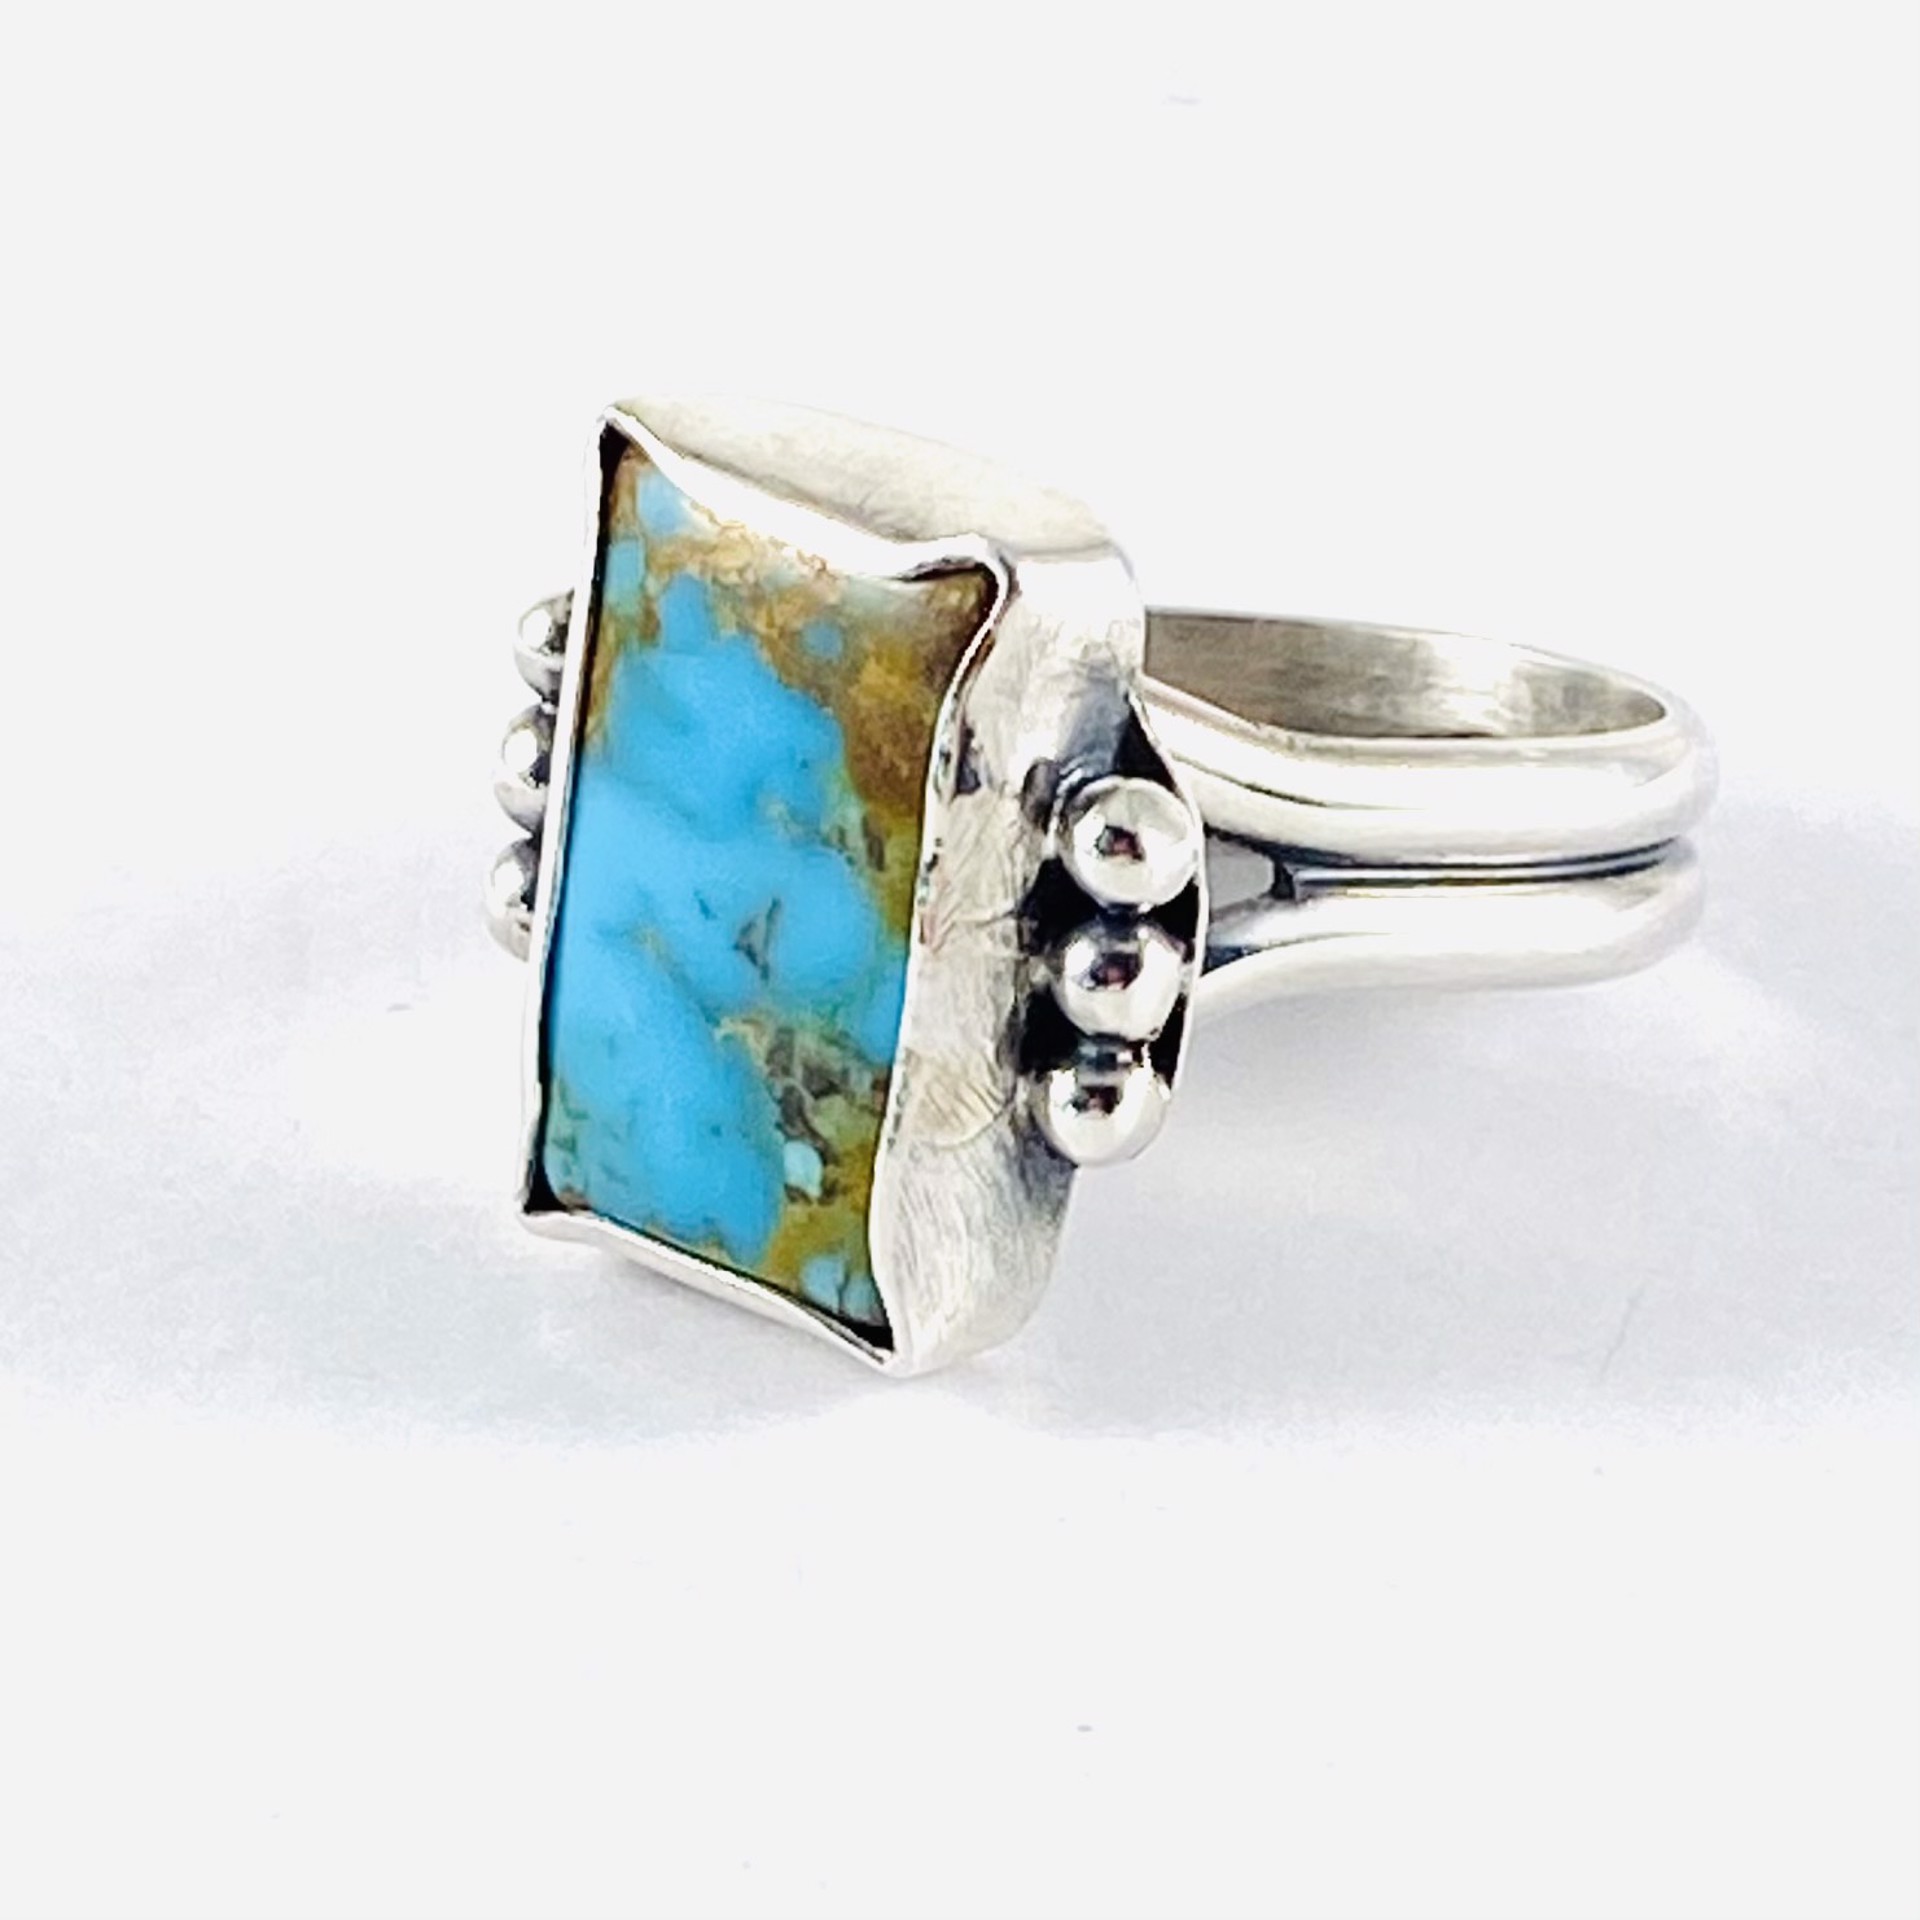 AB21-1 Kingman Turquoise Ring sz 7.5 by Anne Bivens